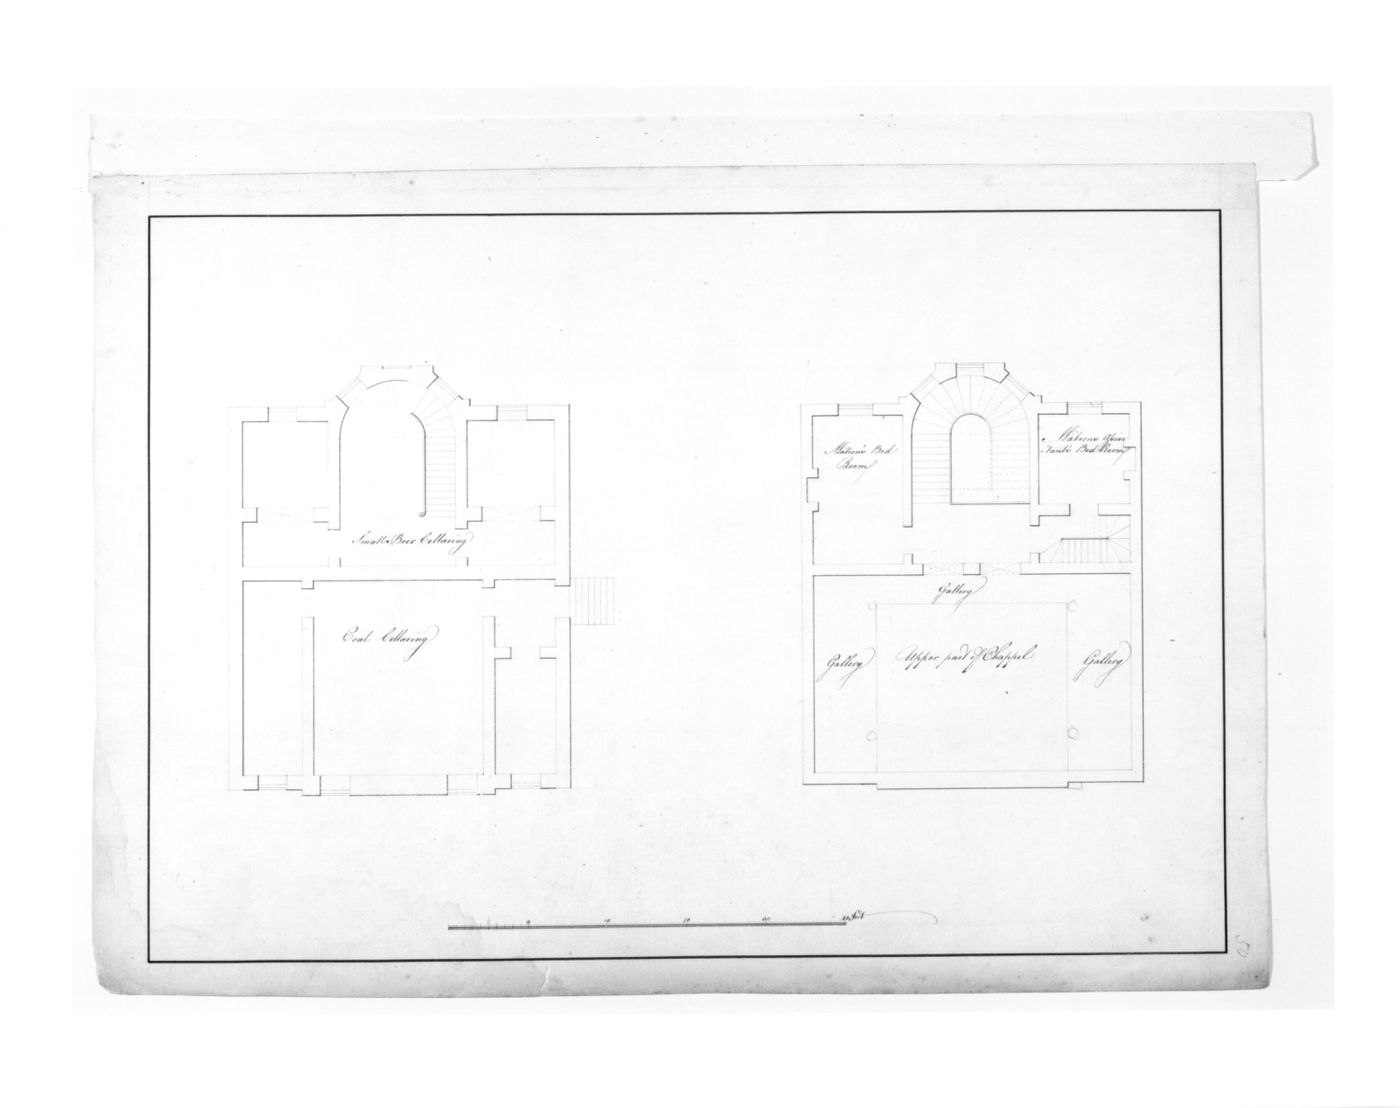 Plan of the cellar and upper chapel for the City of London's Lying-In Hospital, City Road